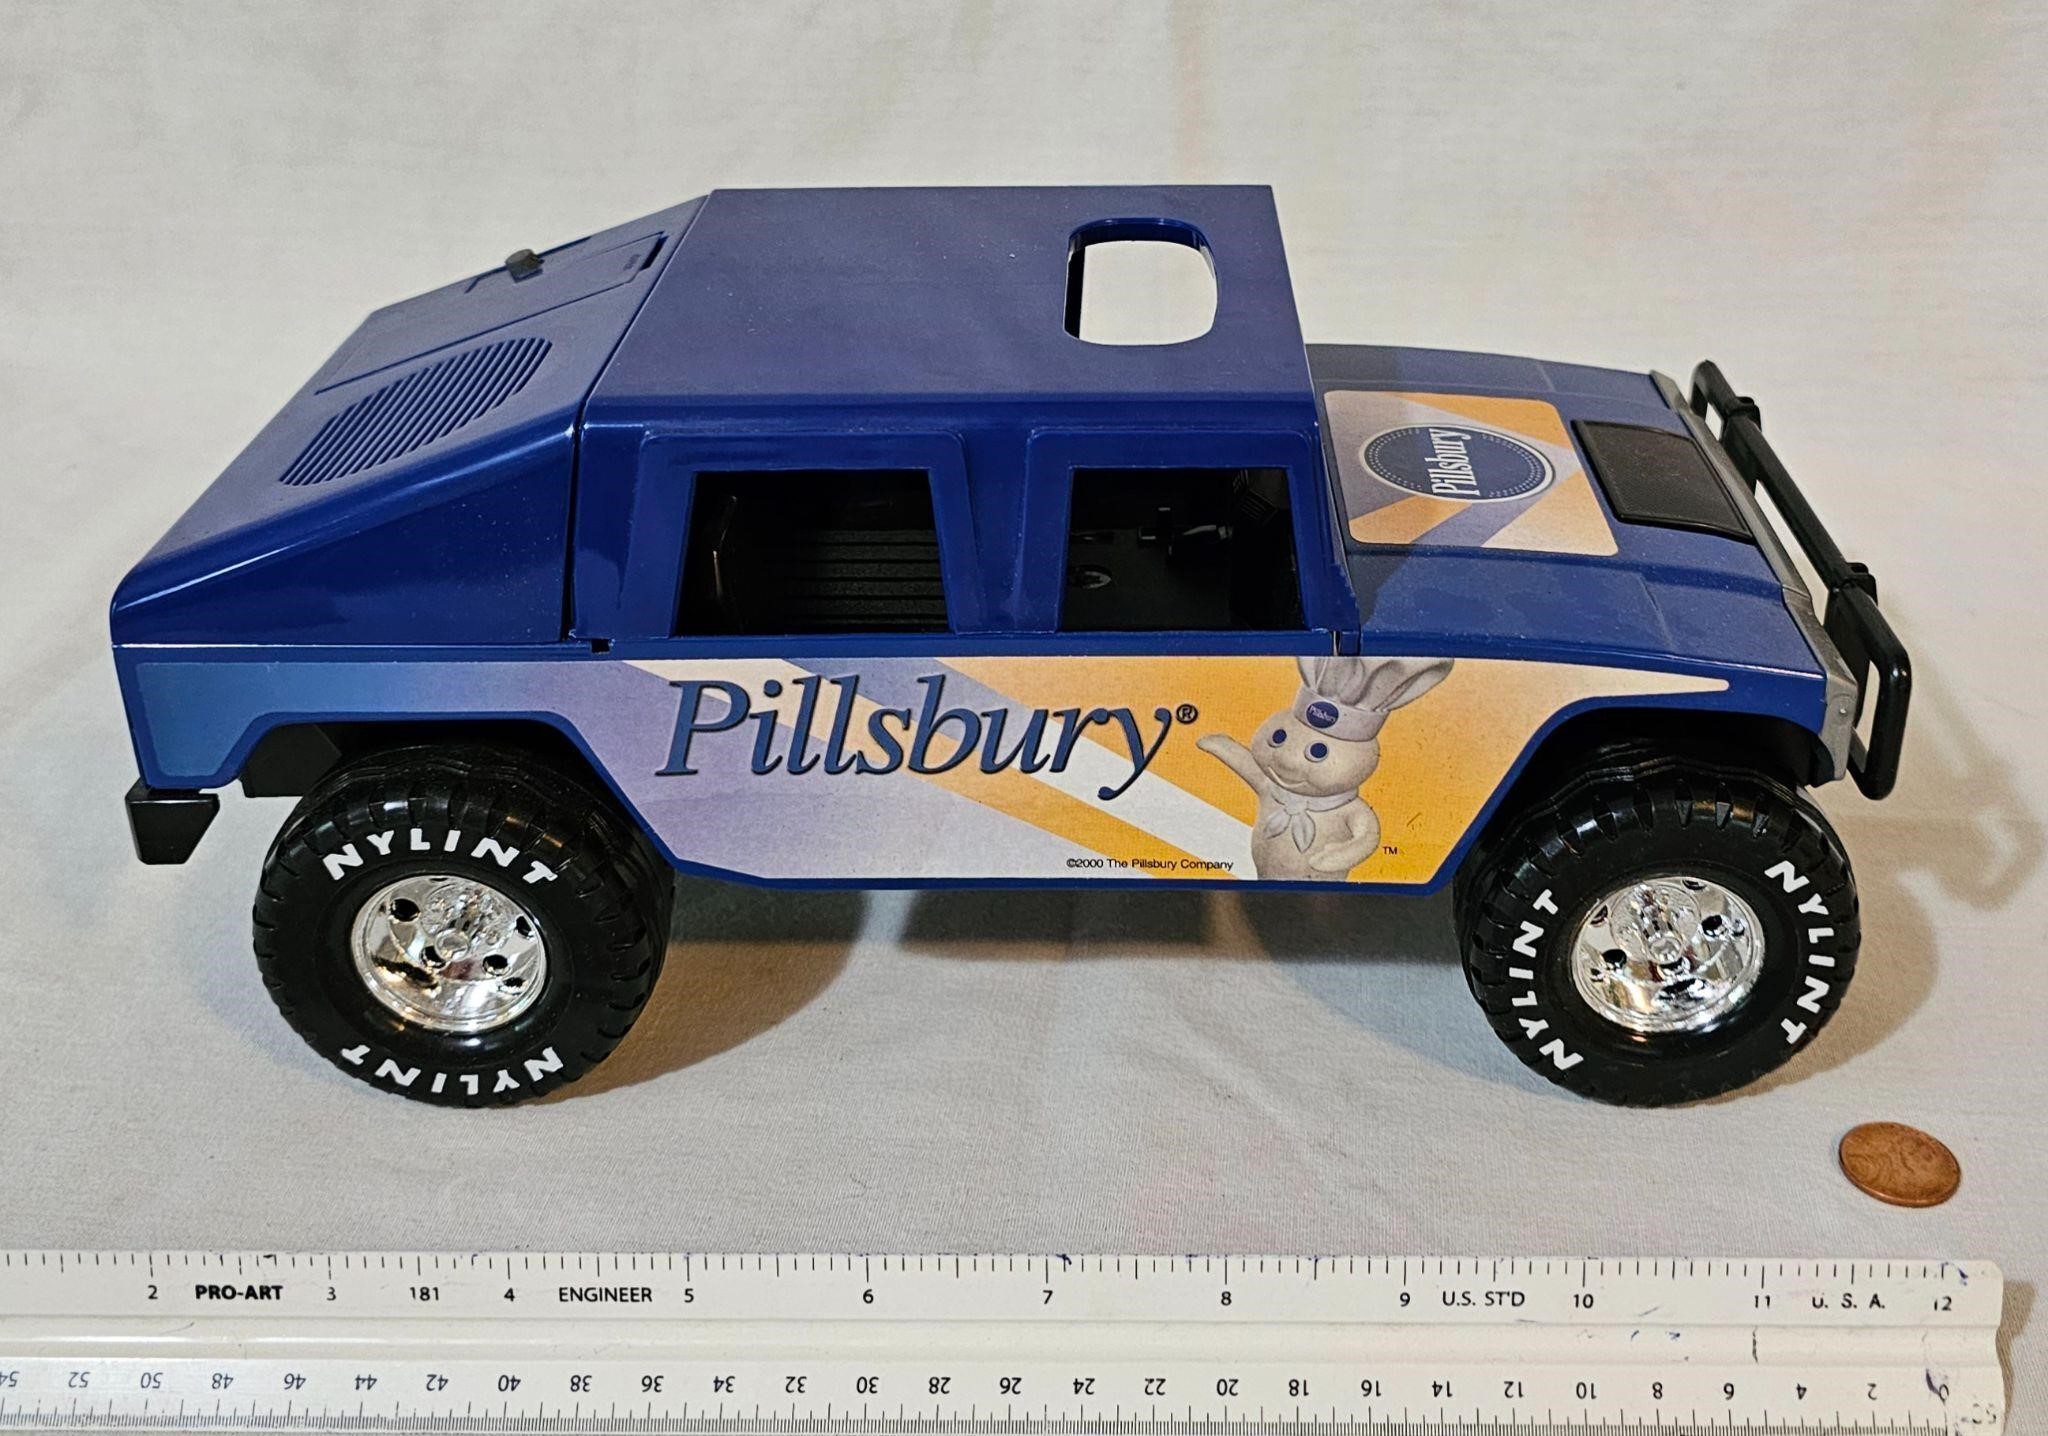 Pillsbury Nylint jeep toy, batteries included